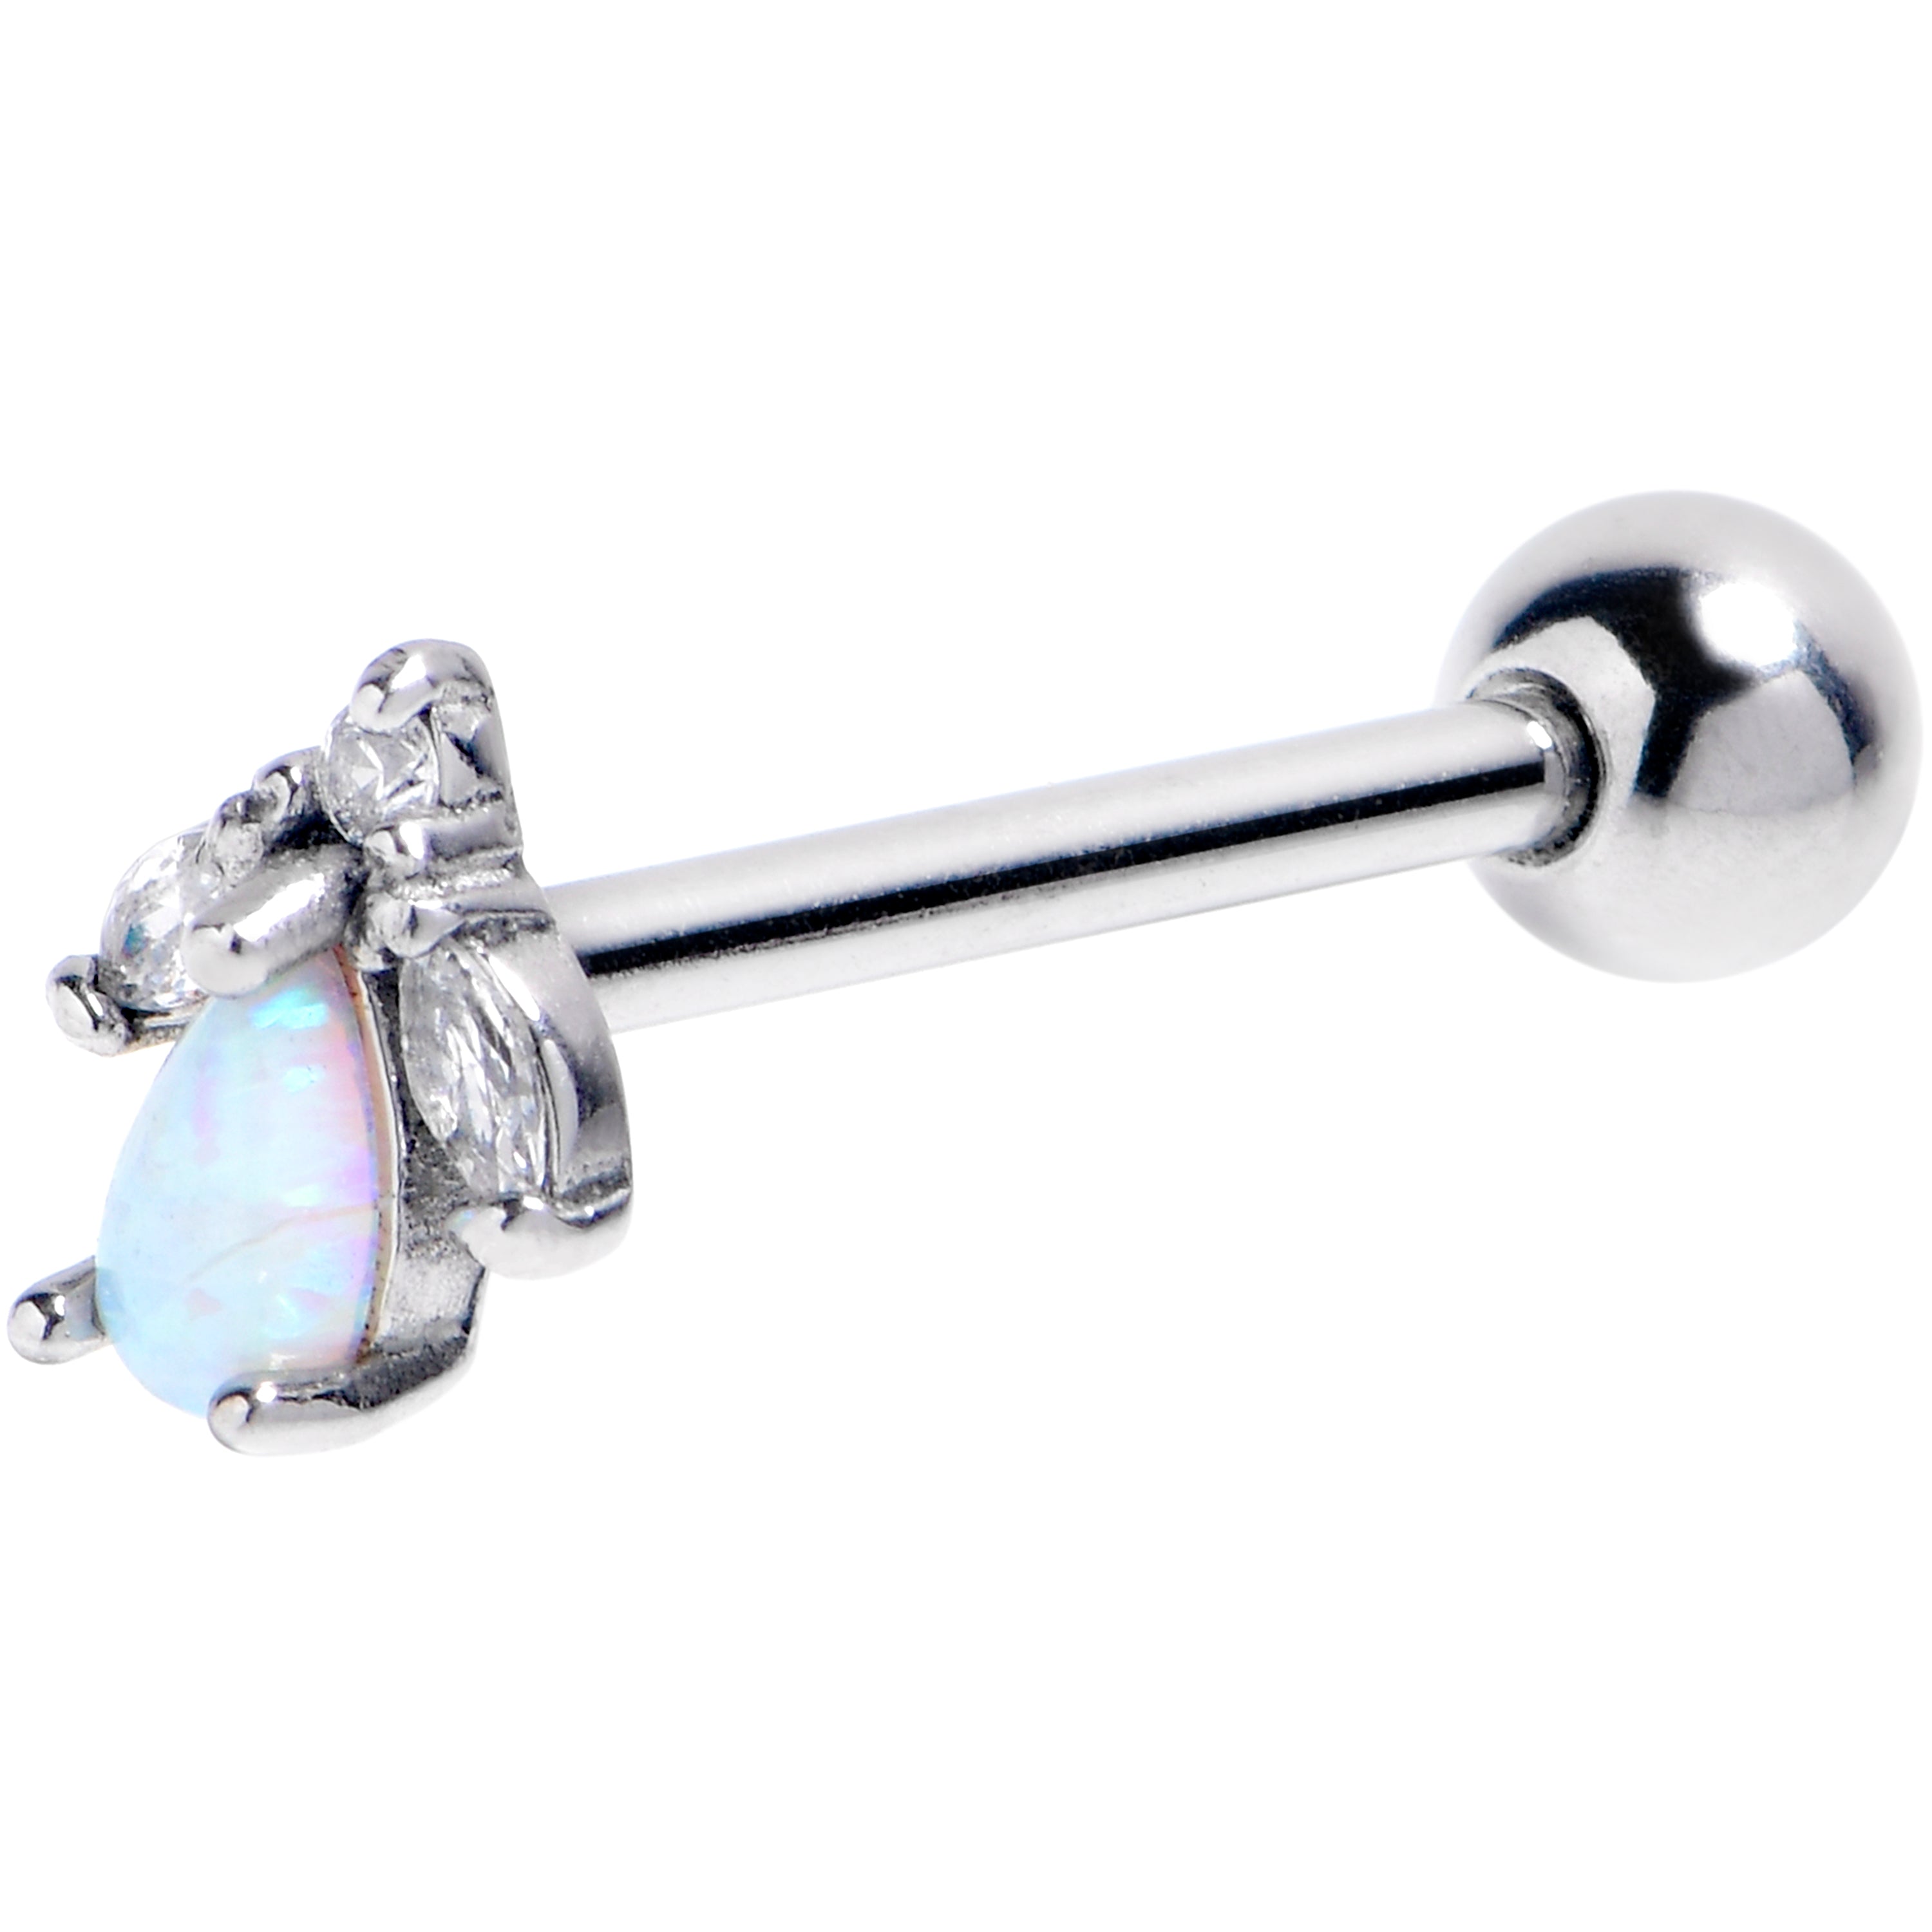 White Faux Opal Flower Barbell Tongue Ring